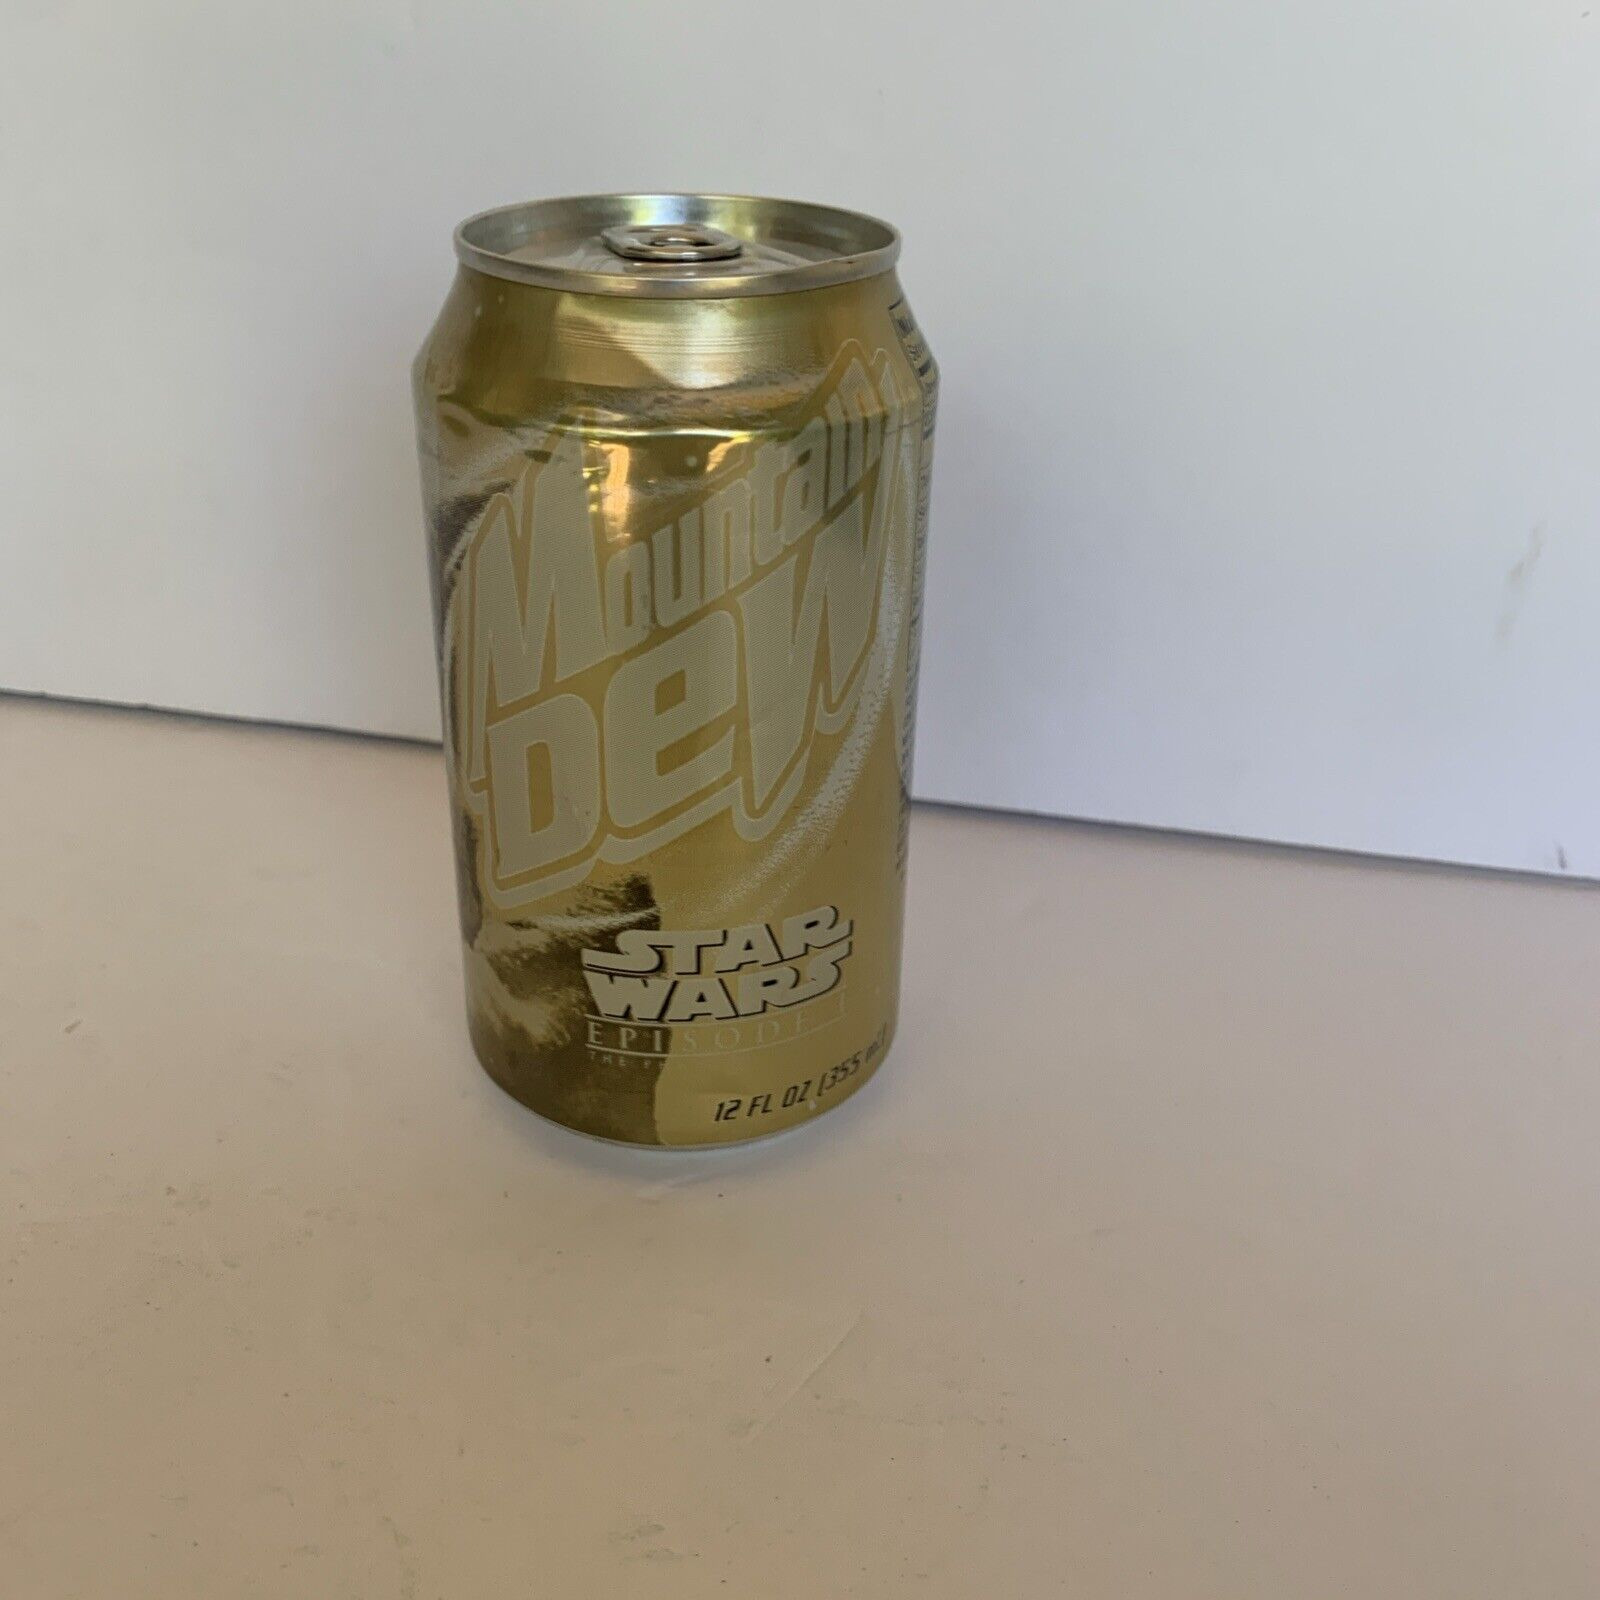 RARE STAR WARS Mountain Dew Limited Edition Gold Yoda Can Full 1999, unopened